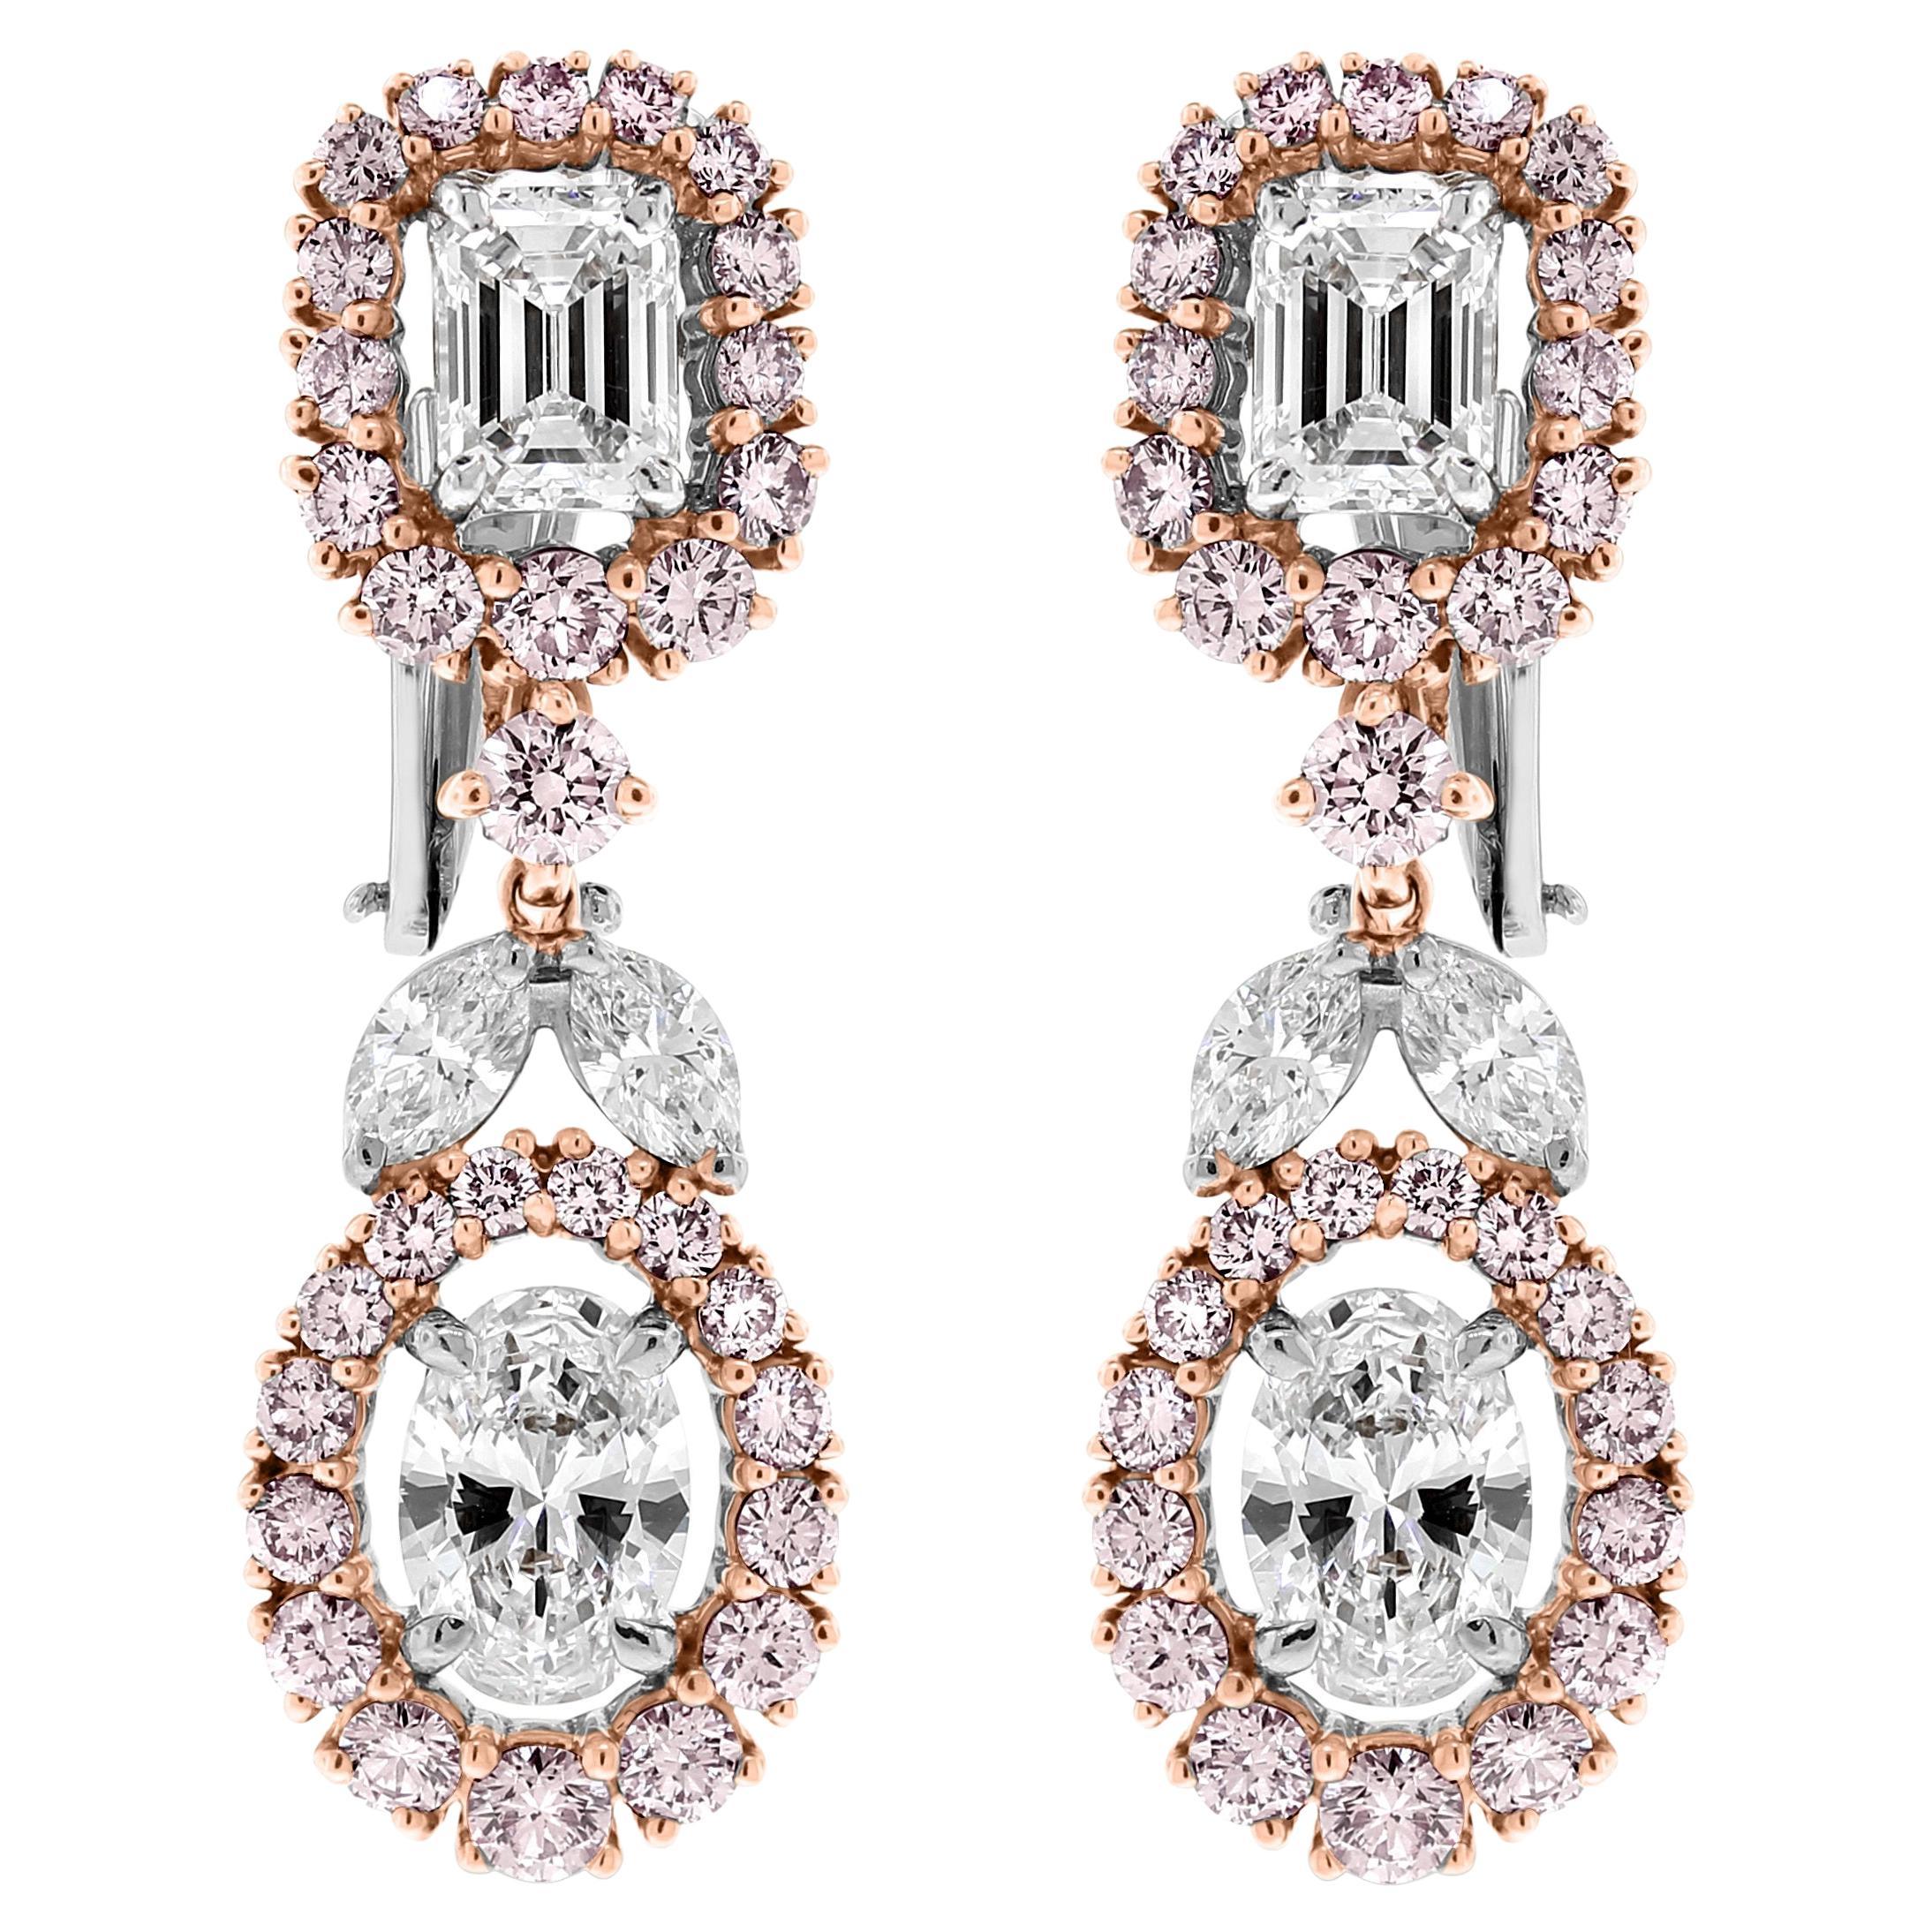 Beauvince Ariana Diamond Earrings '6.91 ct Diamonds' in Rose Gold & Platinum For Sale